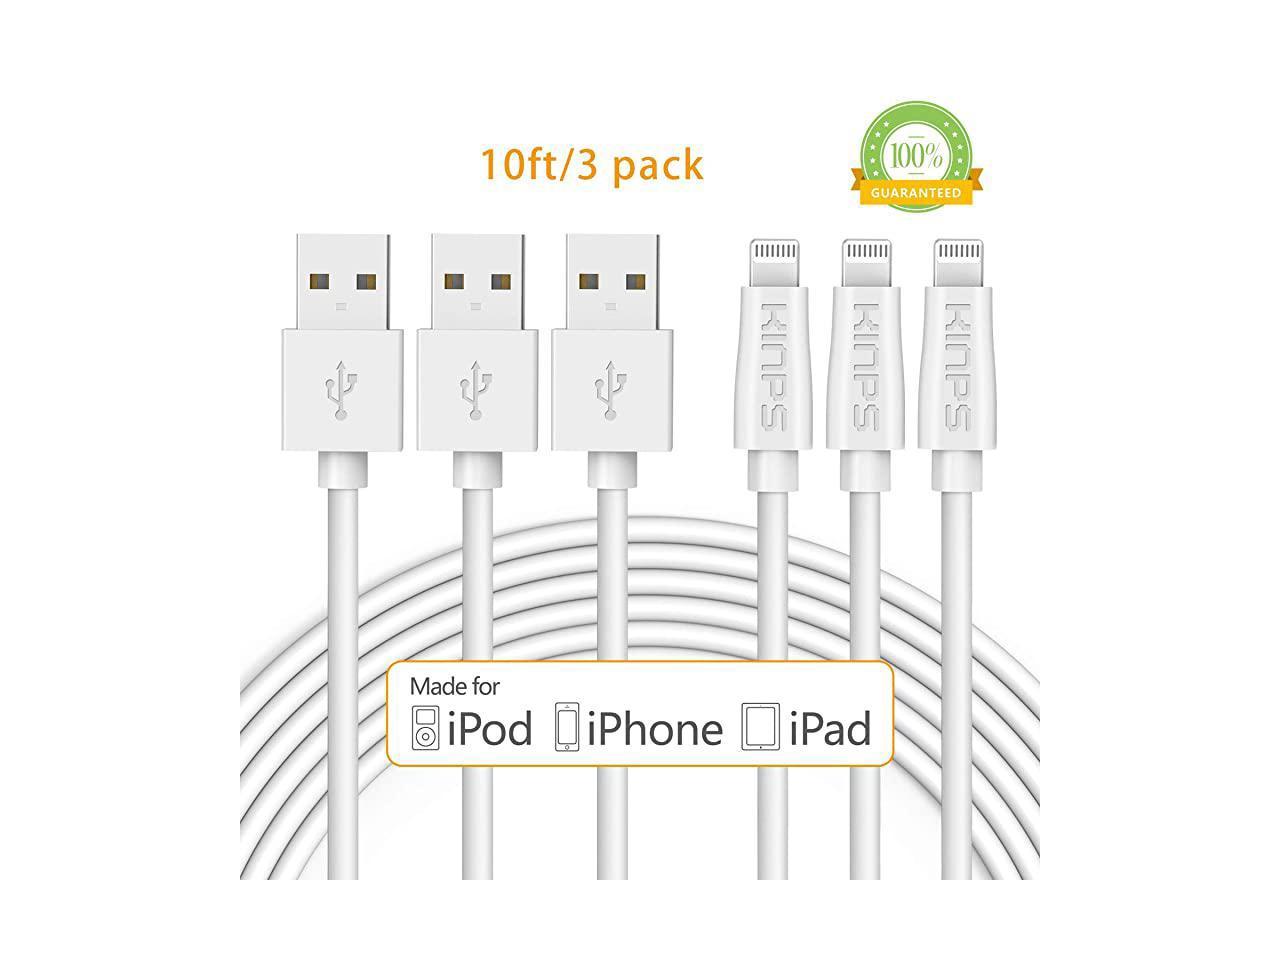 KINPS Apple MFi Certified Lightning to USB Cable iPhone Charger Cord Super Long Compatible with iPhone Xs/XS Max/XR/X/8/8 Plus/7/7 Plus/6S/6S Plus/6/6 Plus/SE 10ft/3m iPad Pro/Air/Mini Green 